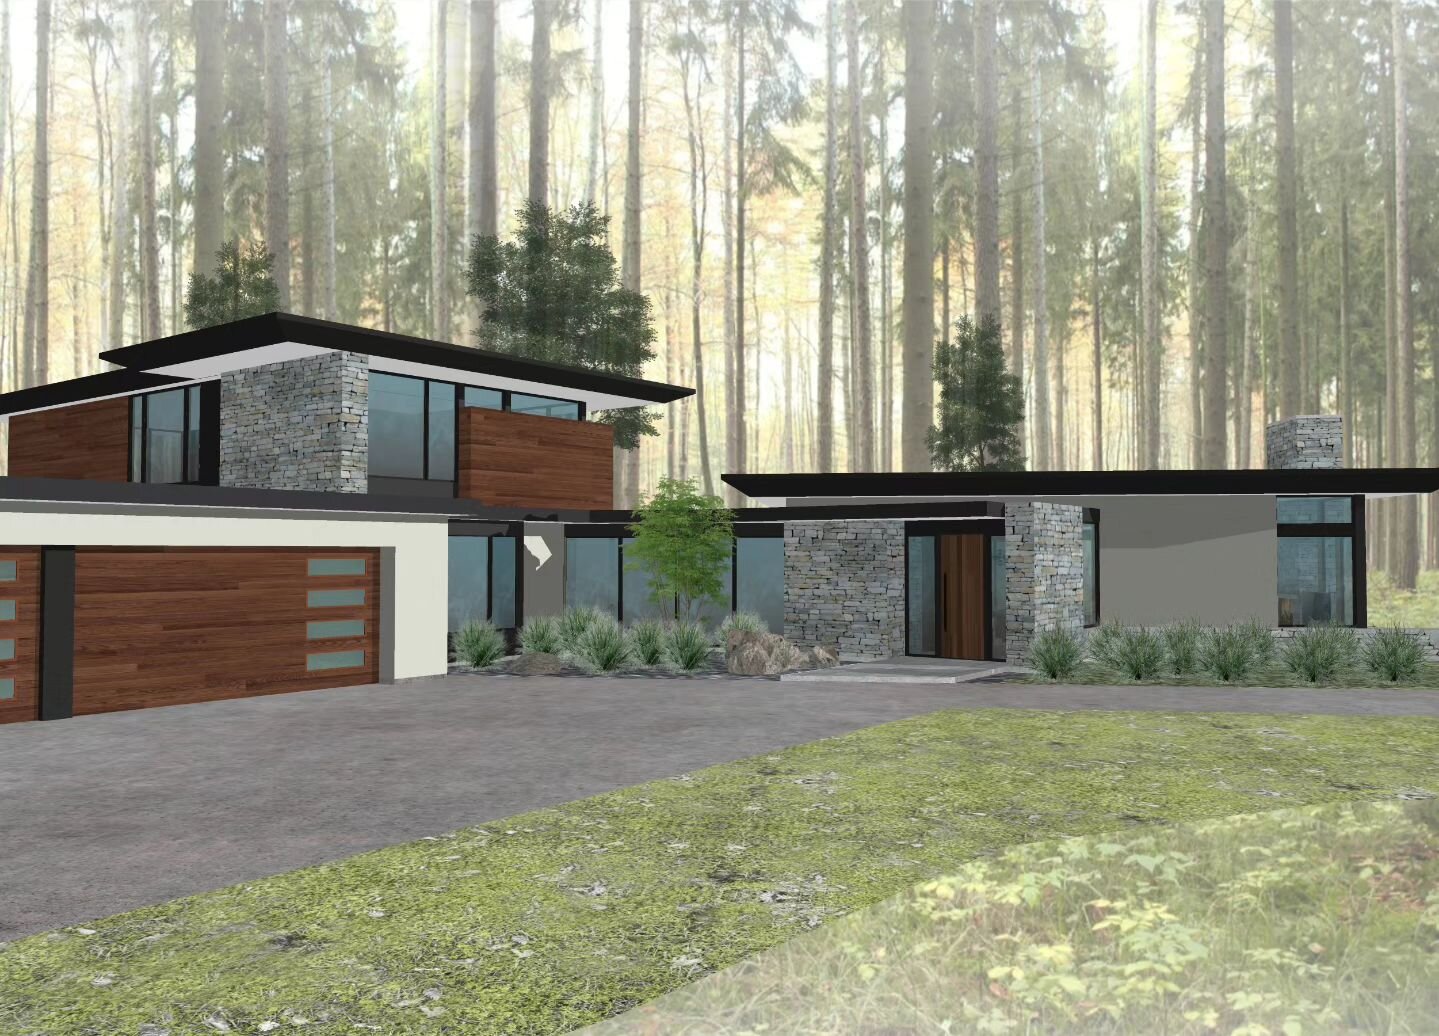 We are very excited about our design underway in River Hills, a modern custom home on a spectacular large wooded lot

#modernhome #modernhomedesign #customhome #luxuryhomes #luxehome #midcenturydesign #midcenturymodern #moderndesign #wisconsinarchite